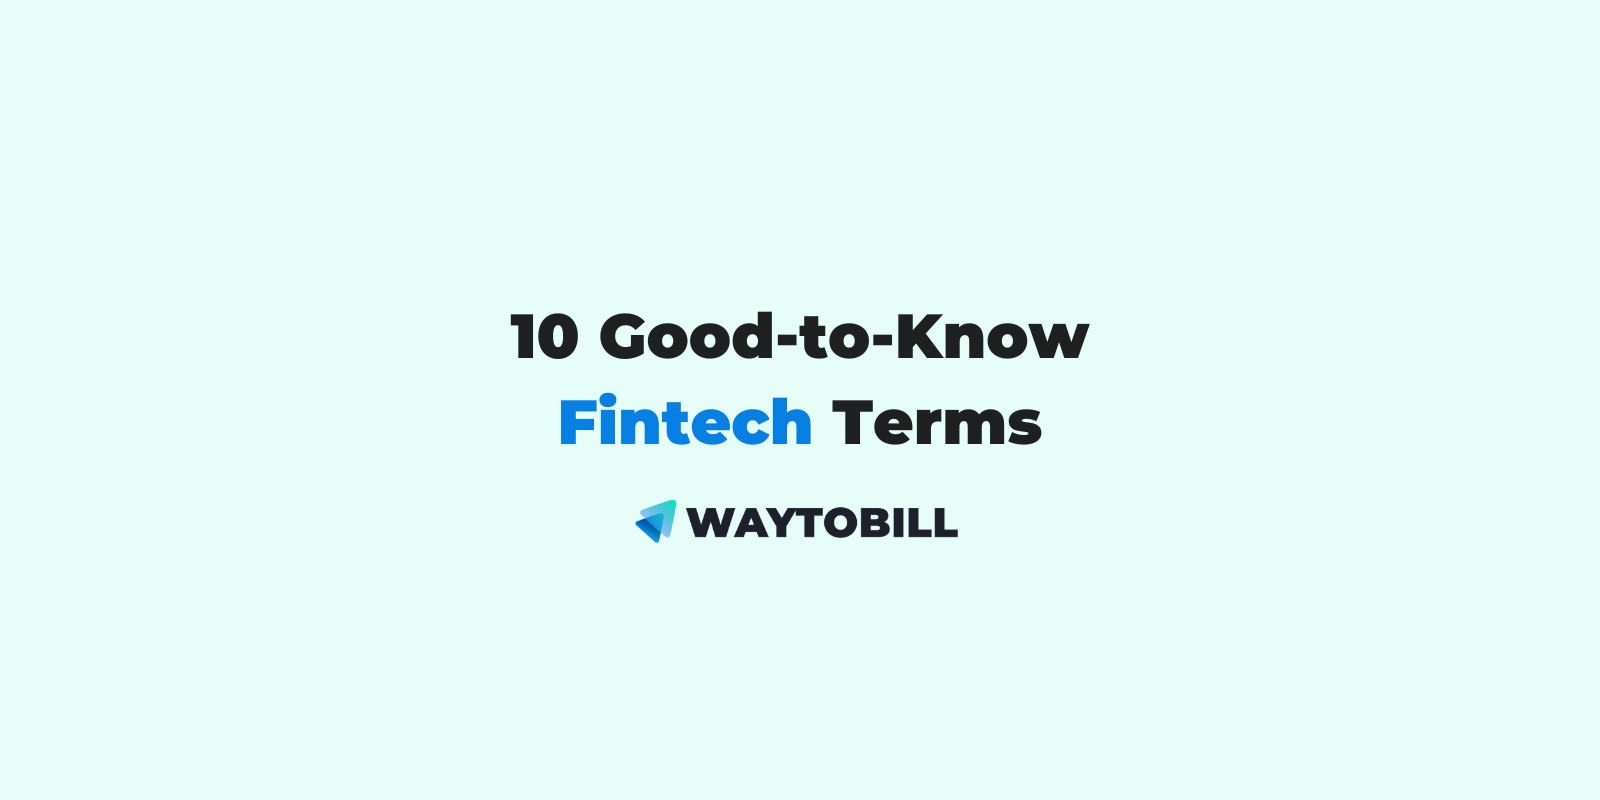 10 Fintech Terms You Should Know + What Is Fintech?